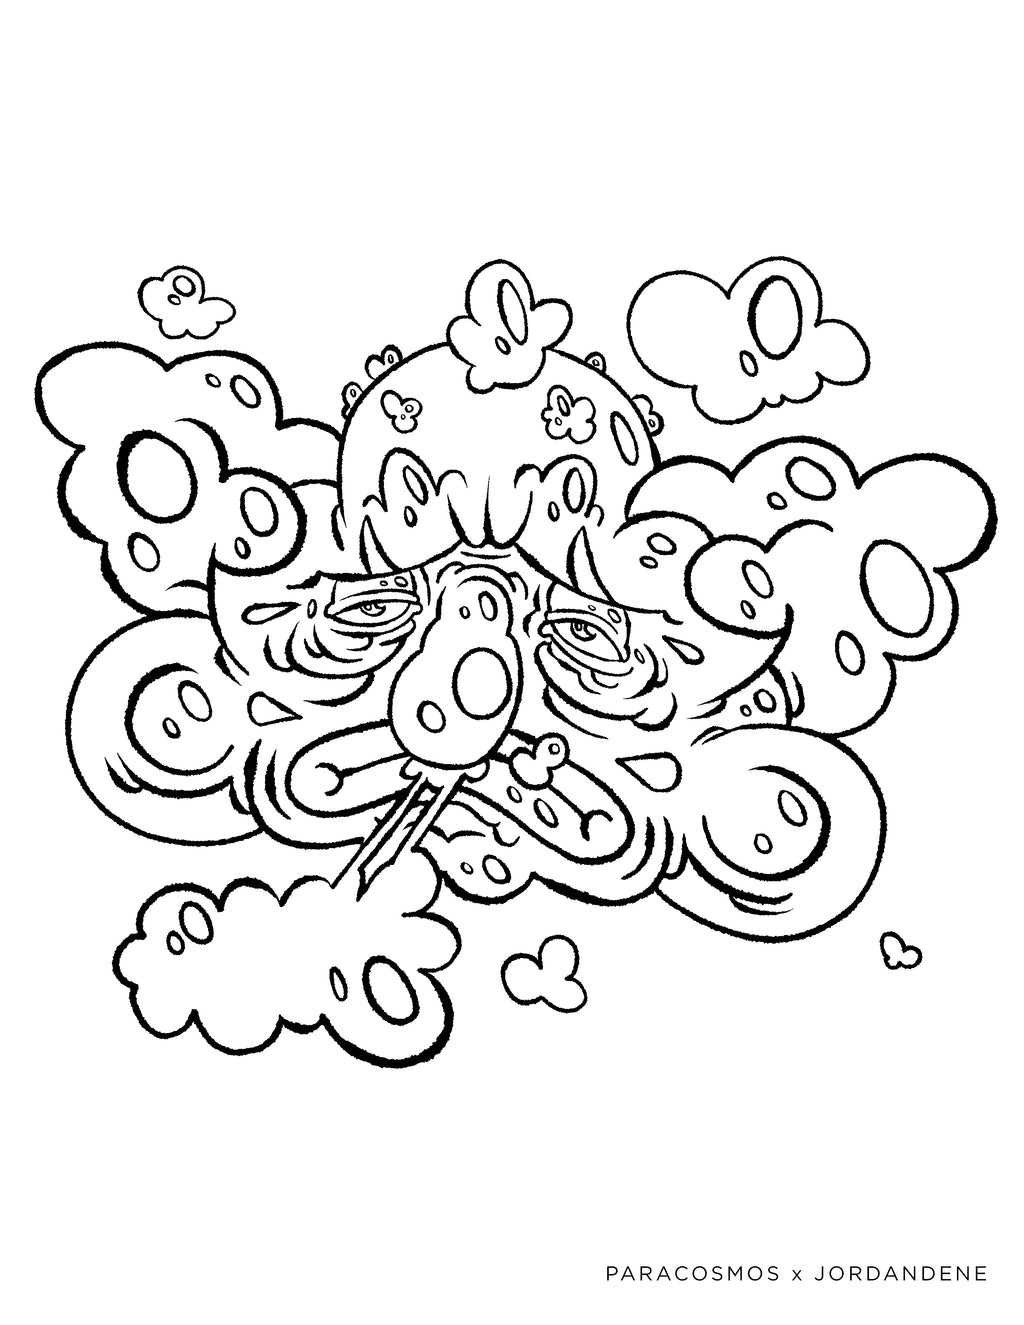 Clowdy Free Coloring Page